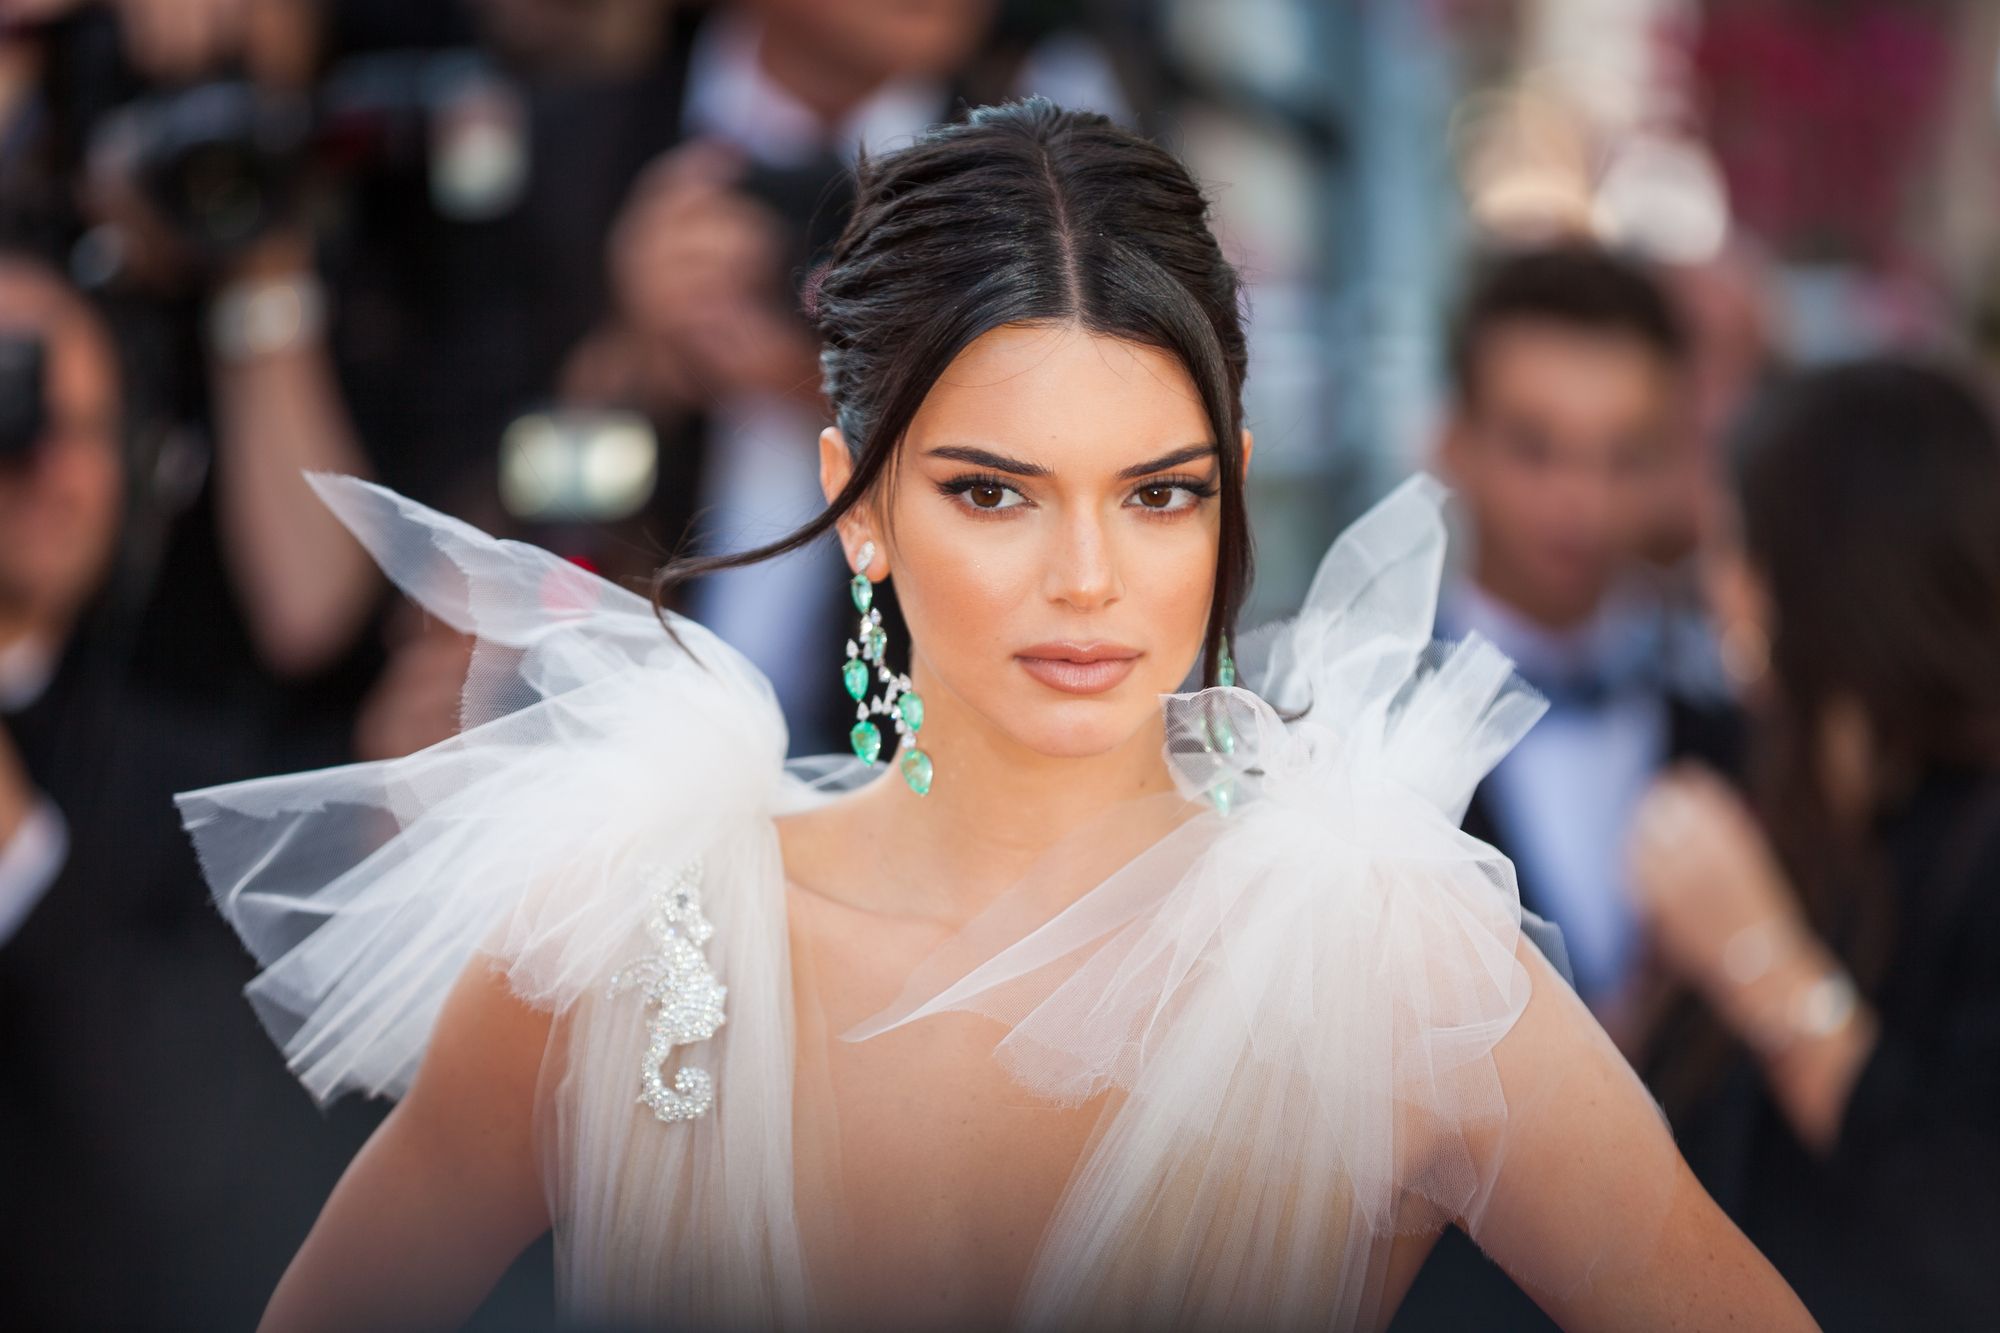 Kendall Jenner Called A Hypocrite For Posing In $27,000 Fur Coat